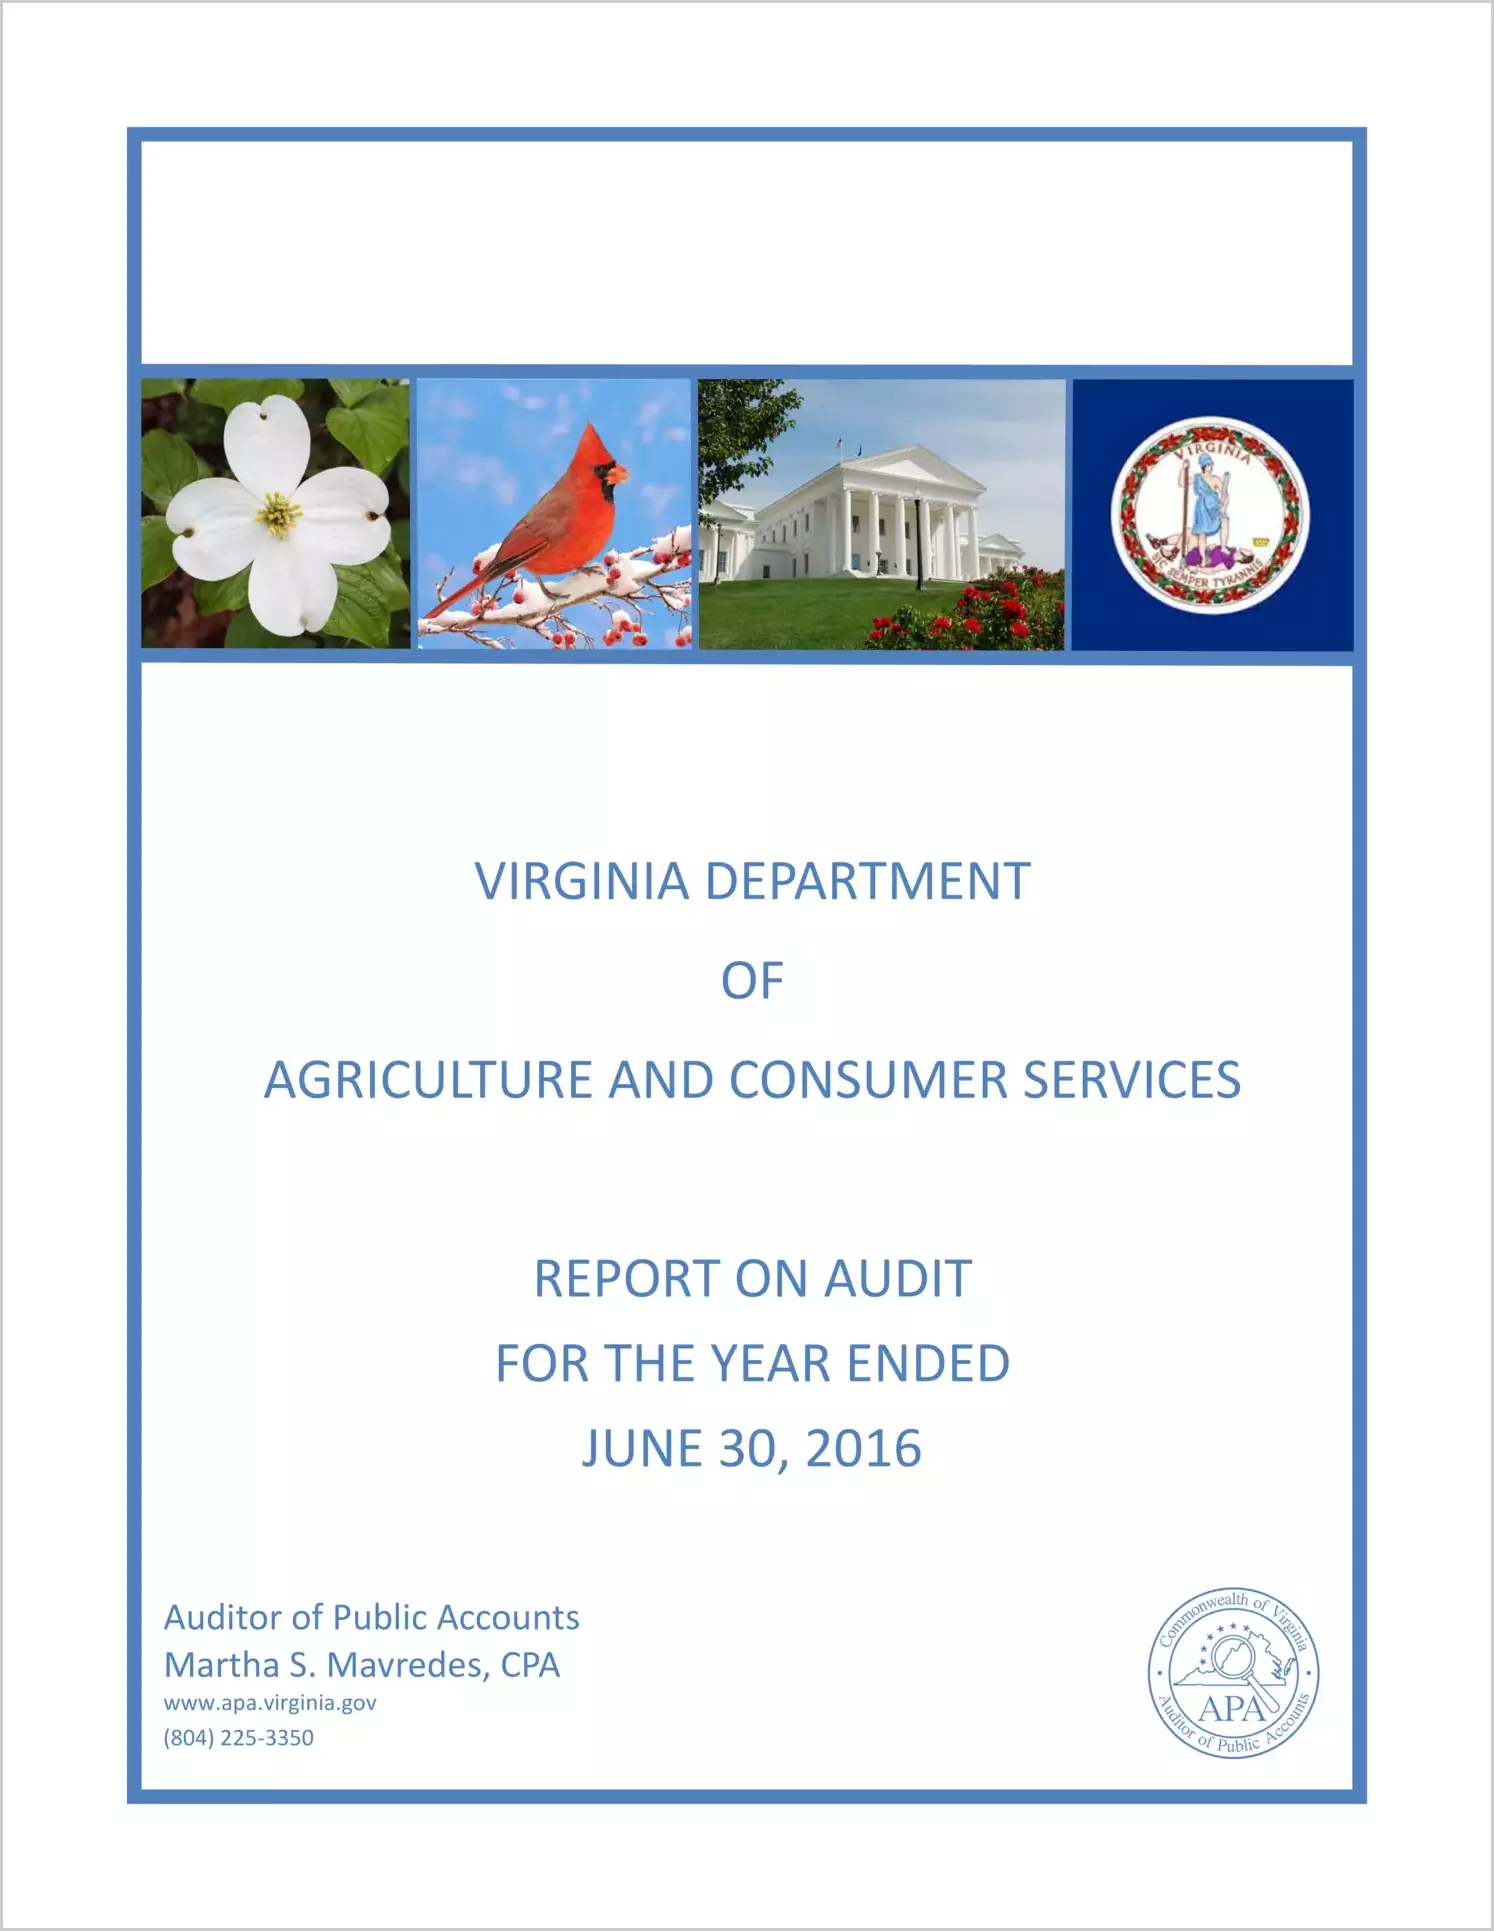 Virginia Department of Agriculture and Consumer Services for the year ended June 30, 2016